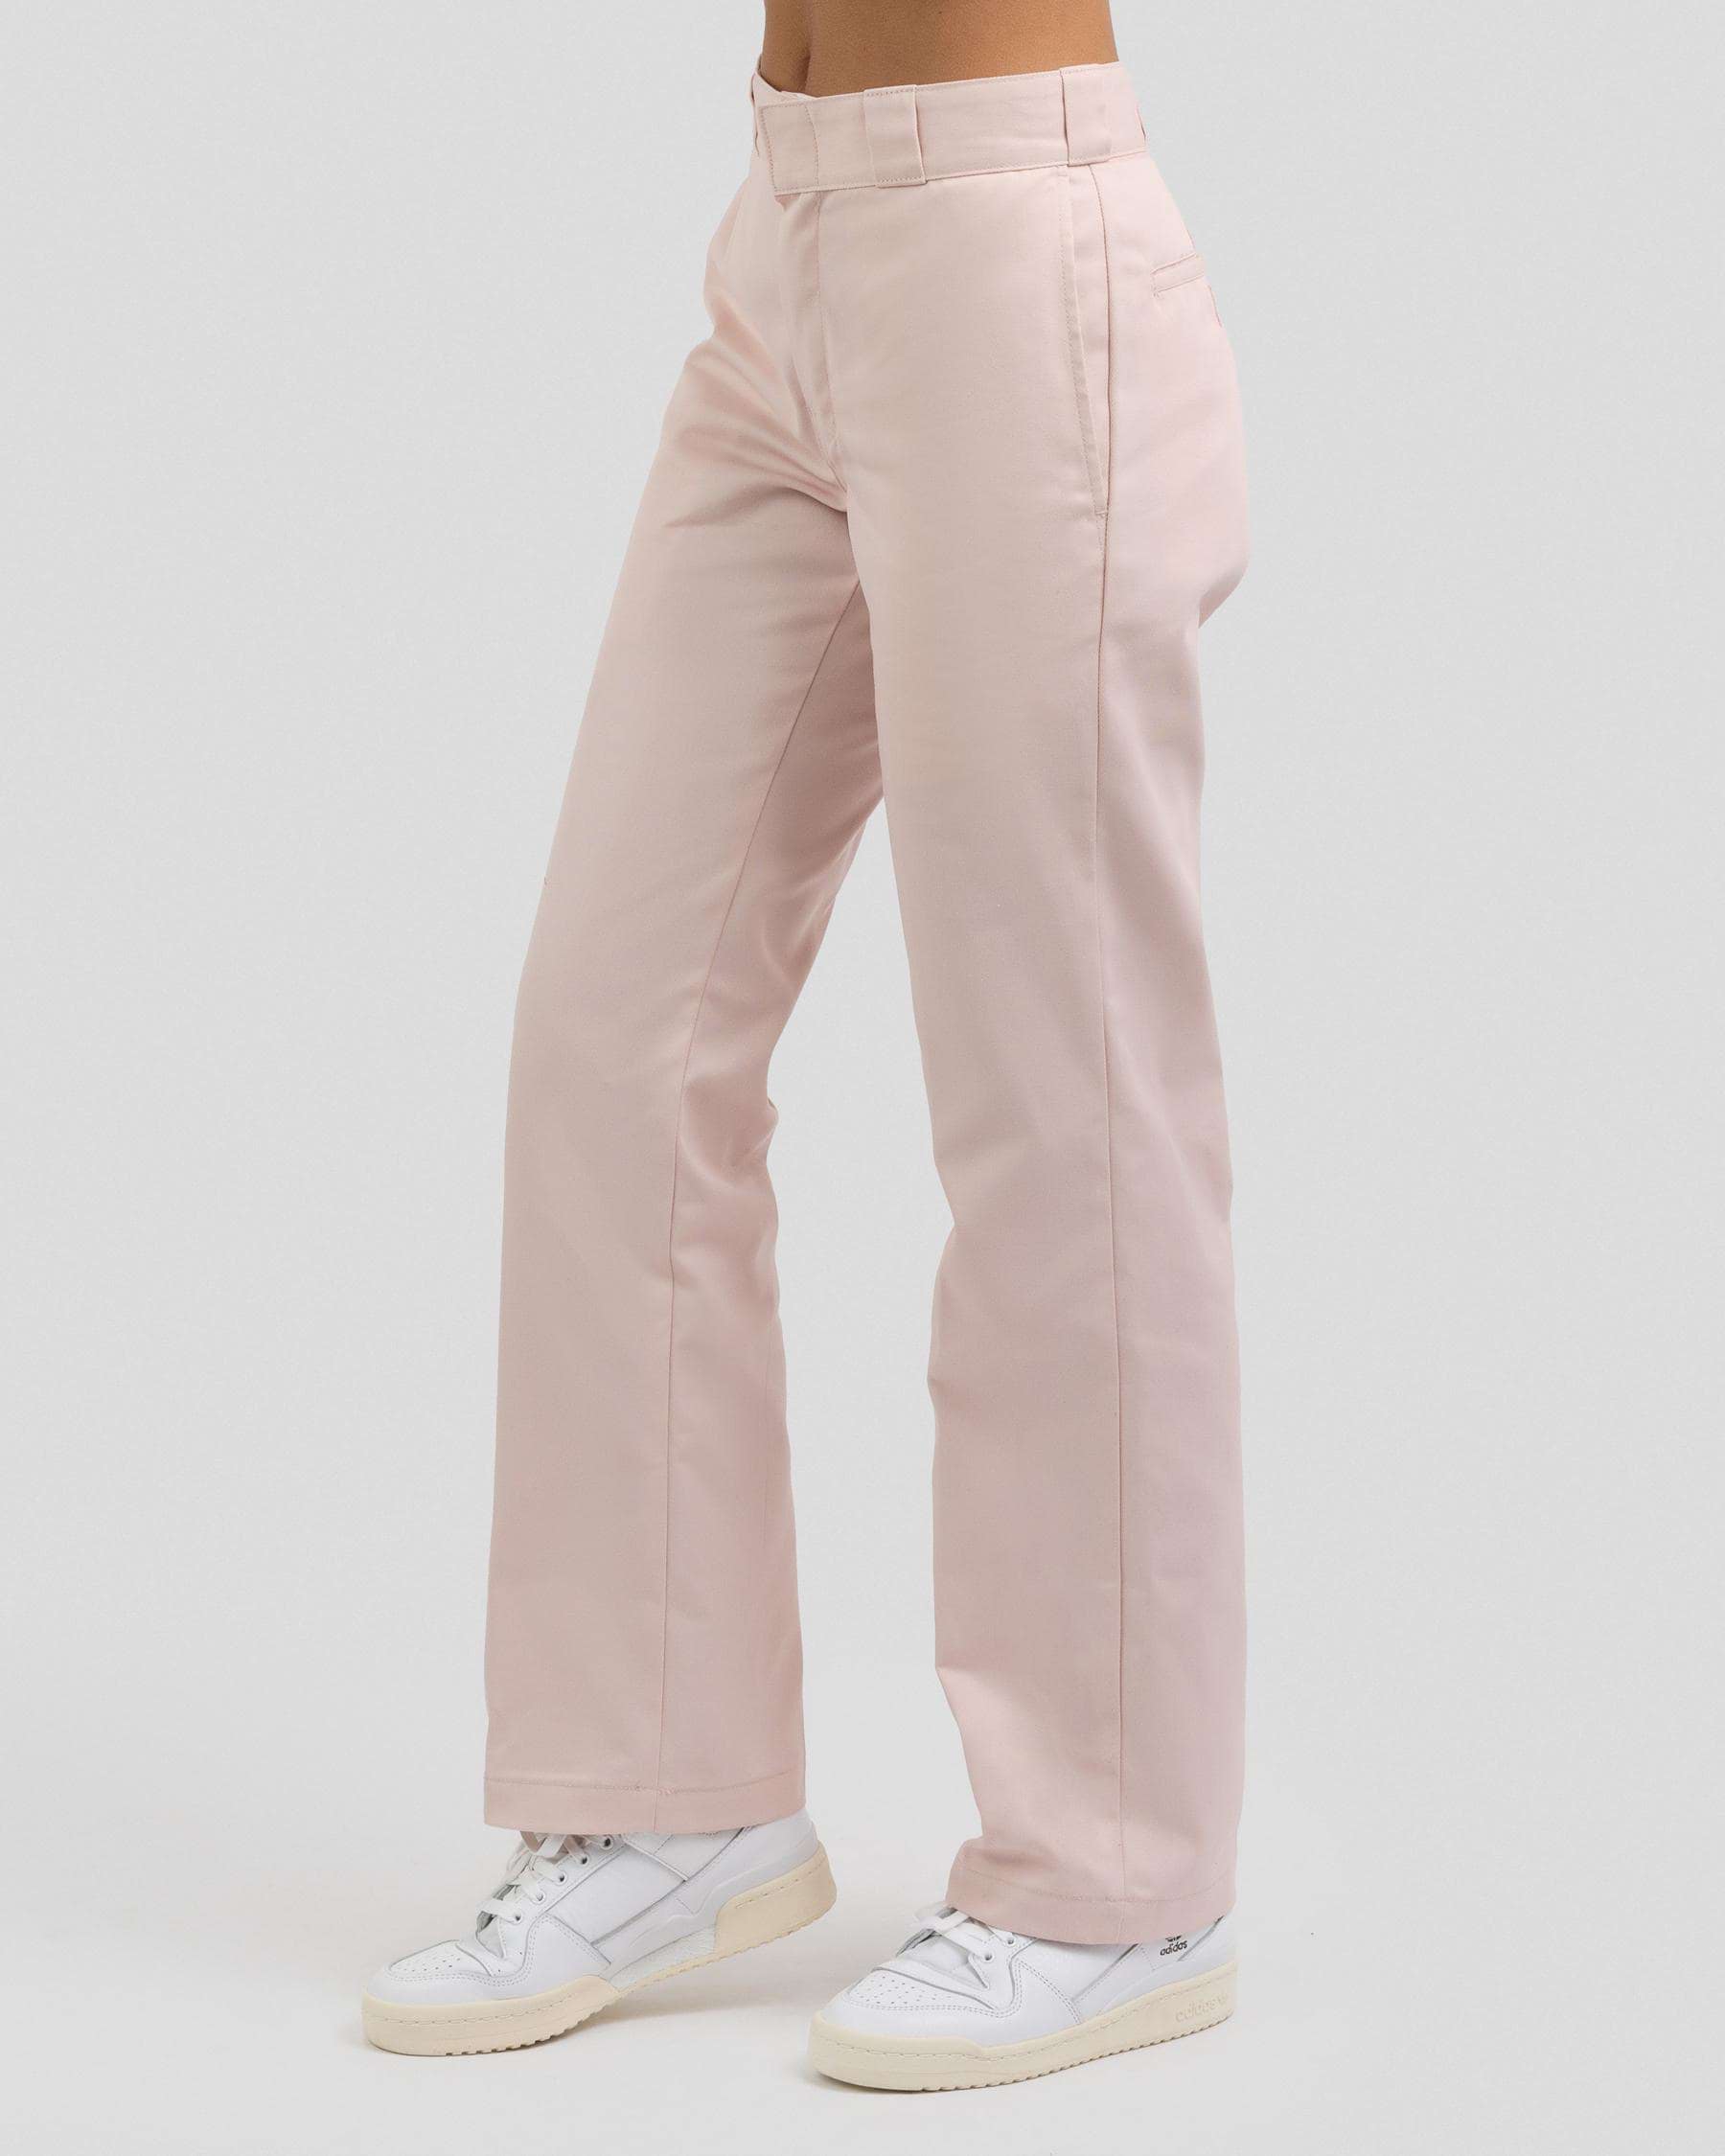 Dickies Original Pants In Pink - Fast Shipping & Easy Returns - City United States